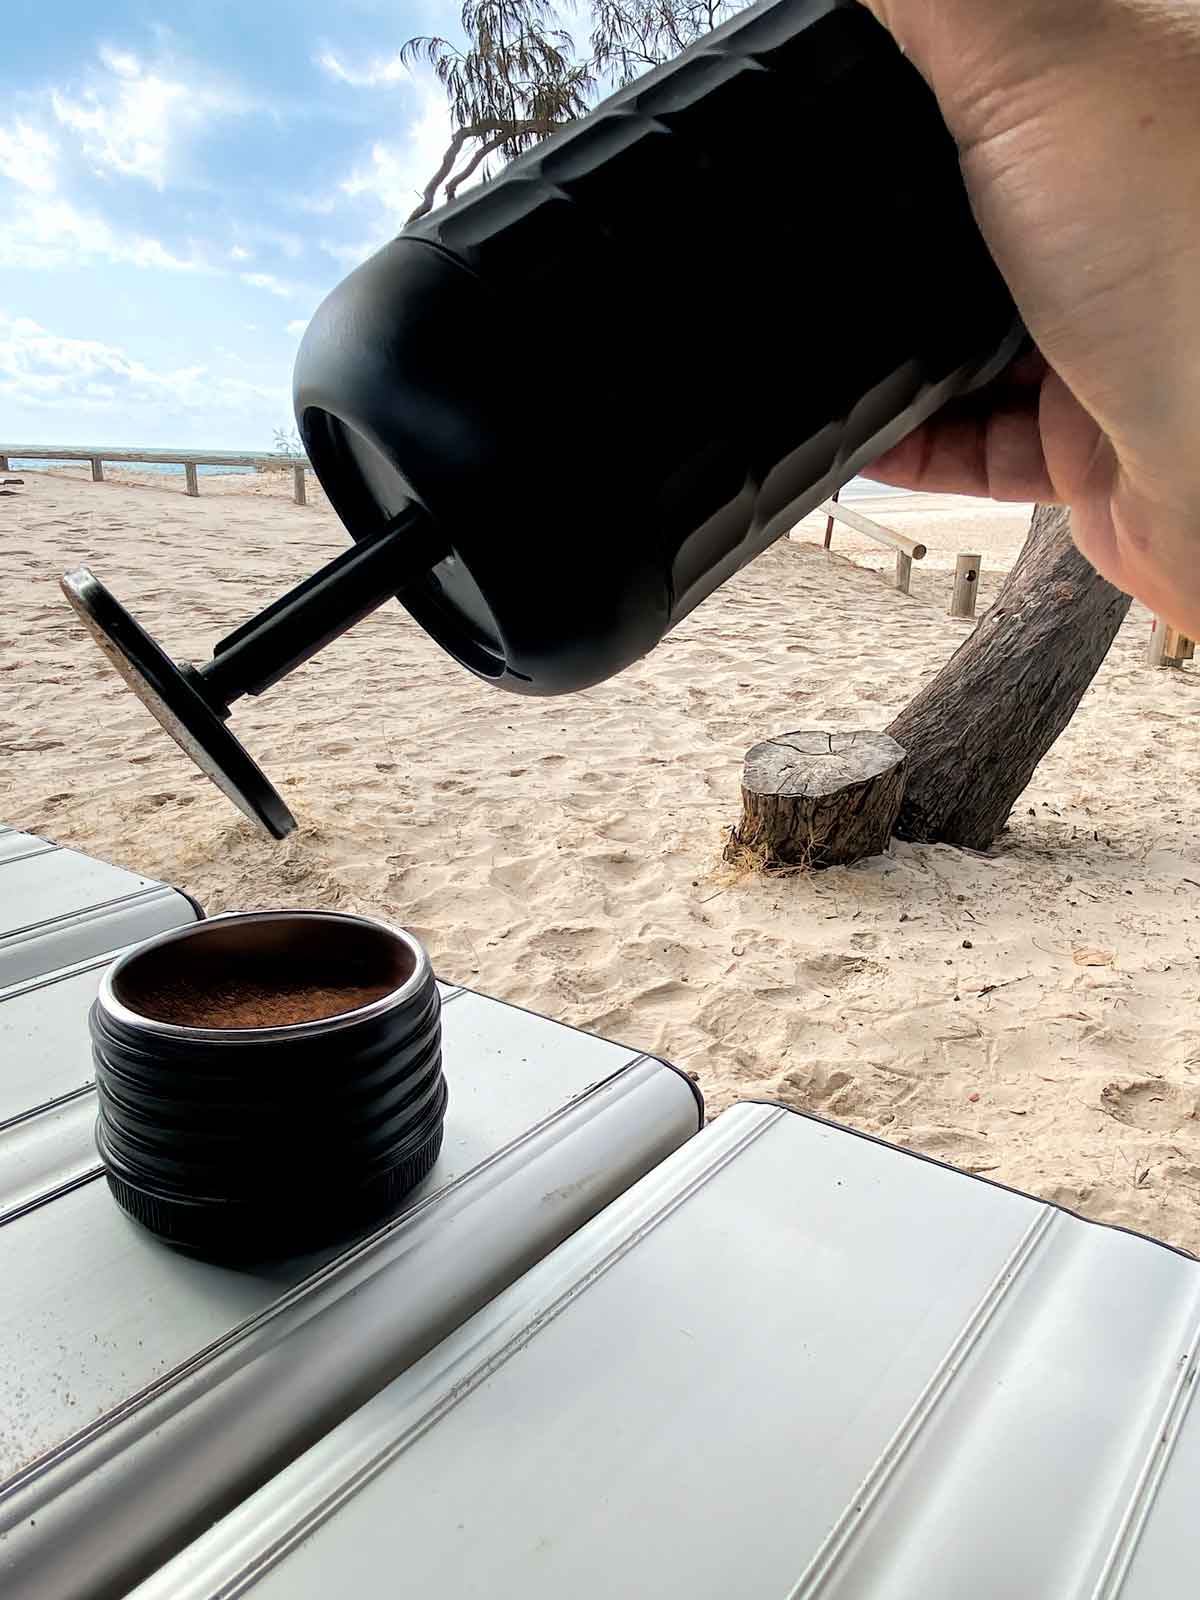 Using the pump top as a tamp for the espresso grounds.